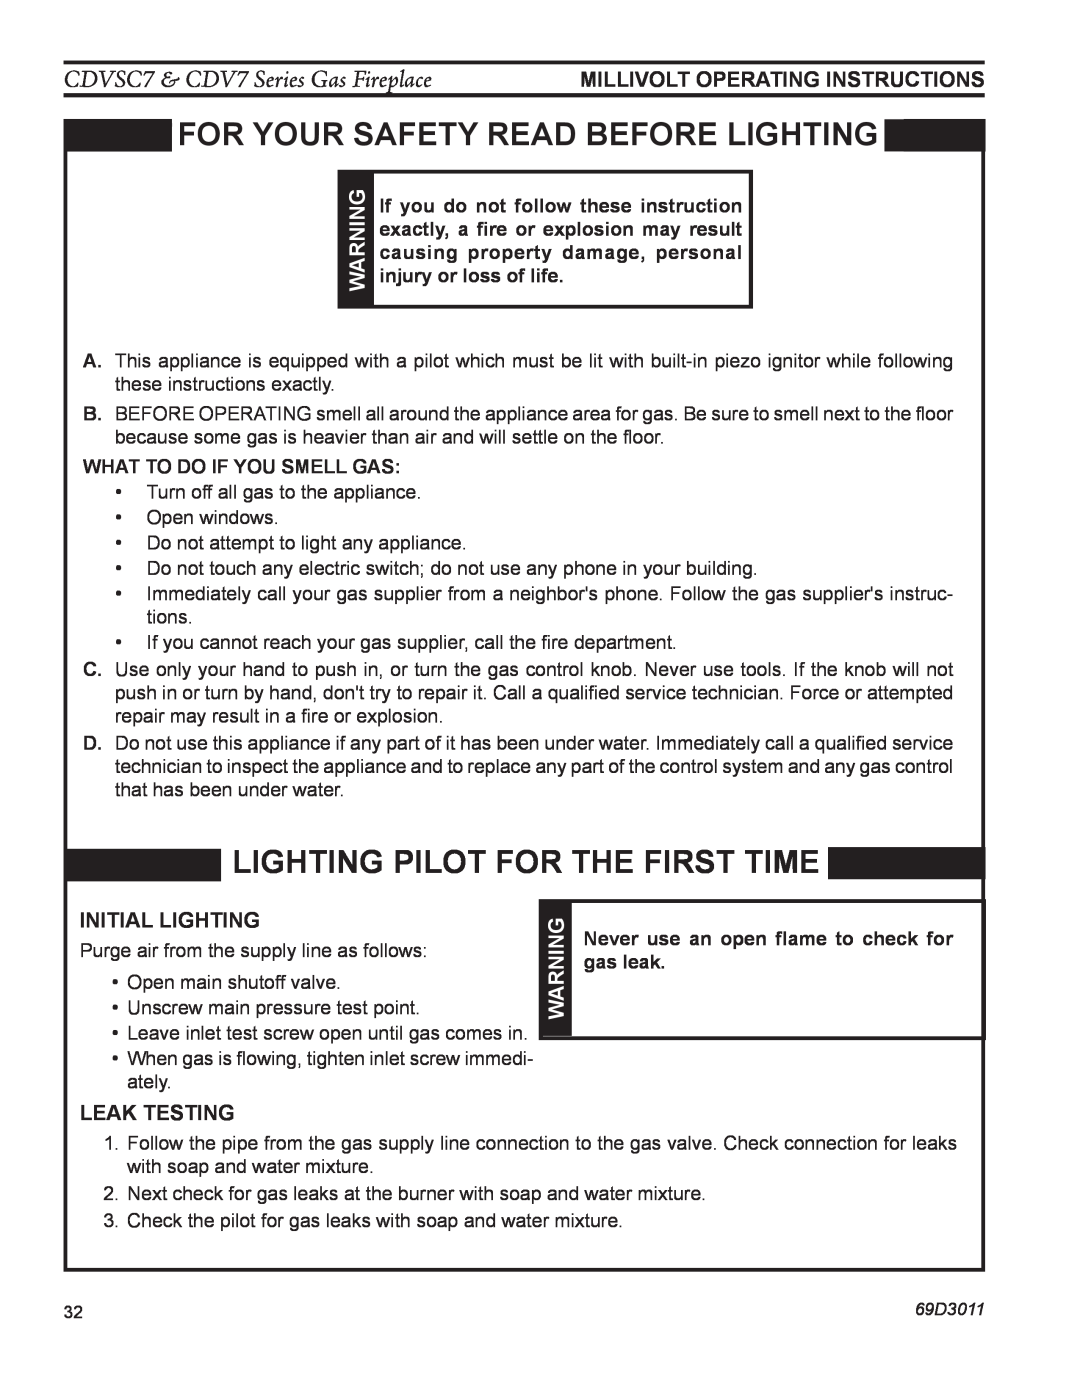 Monessen Hearth CDV7 manual for your safety read before lighting, Lighting pilot for the first time, initial lighting 